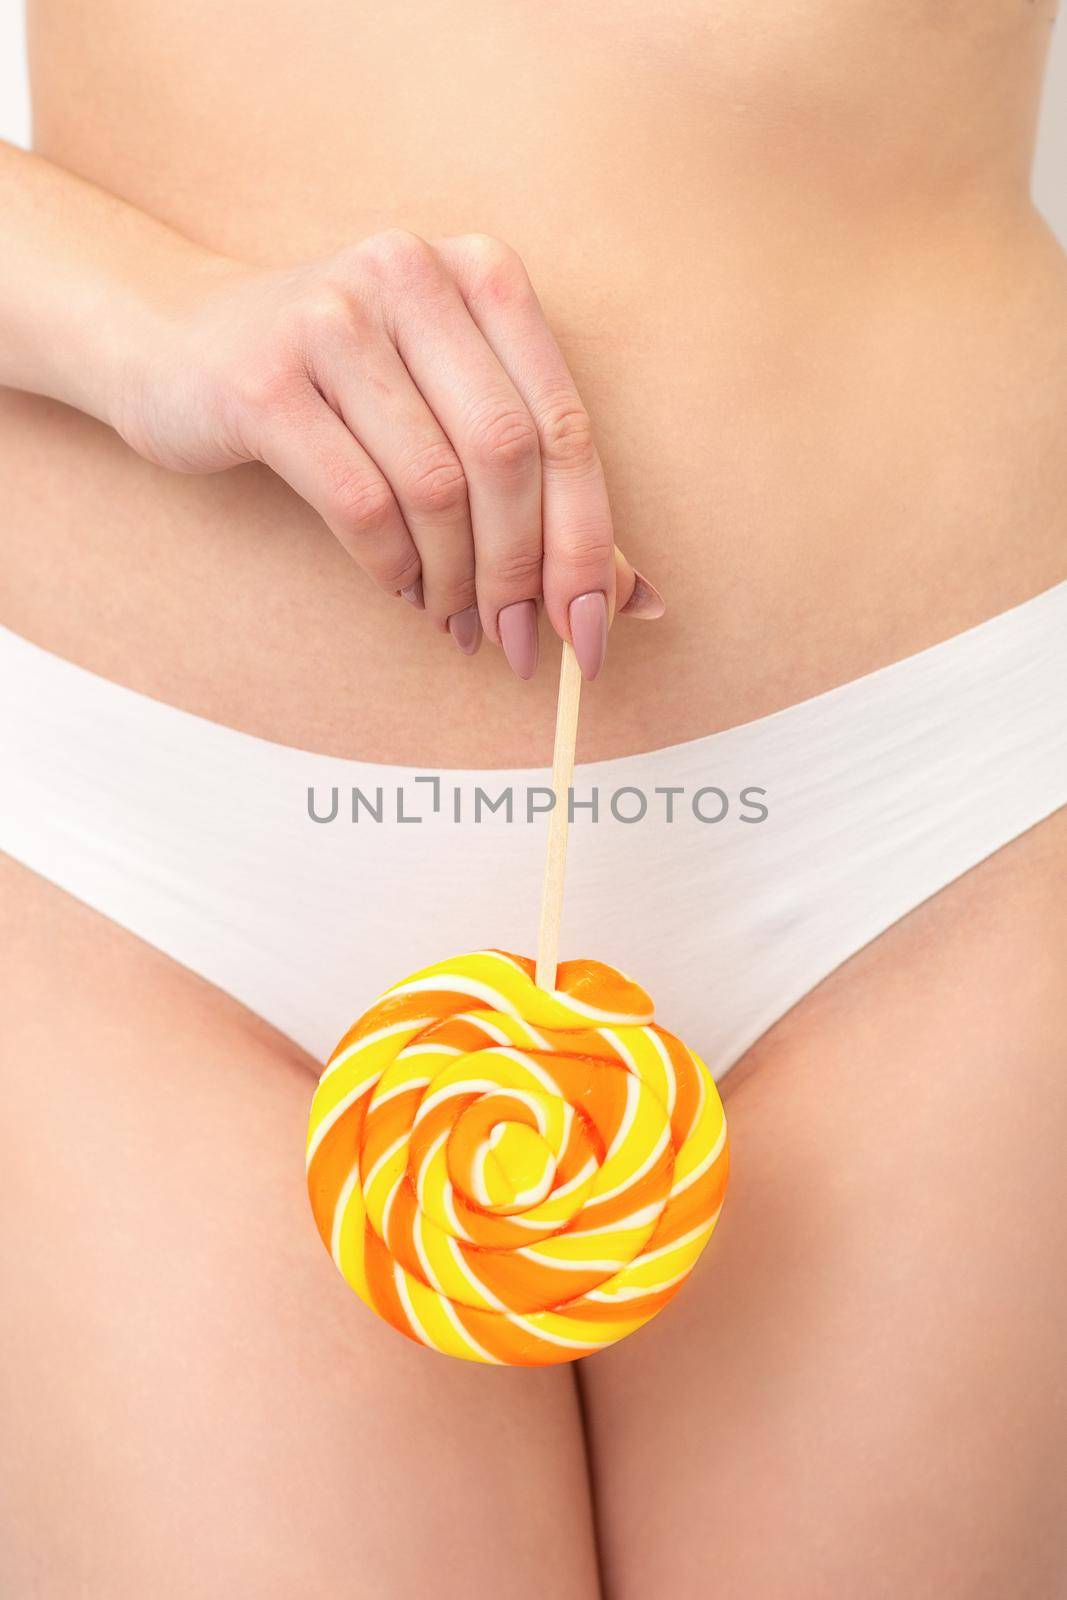 Hand of a woman wearing white panties holding lollipop on a stick covering the intimate area, the concept of intimate depilation, problems of intimate hygiene